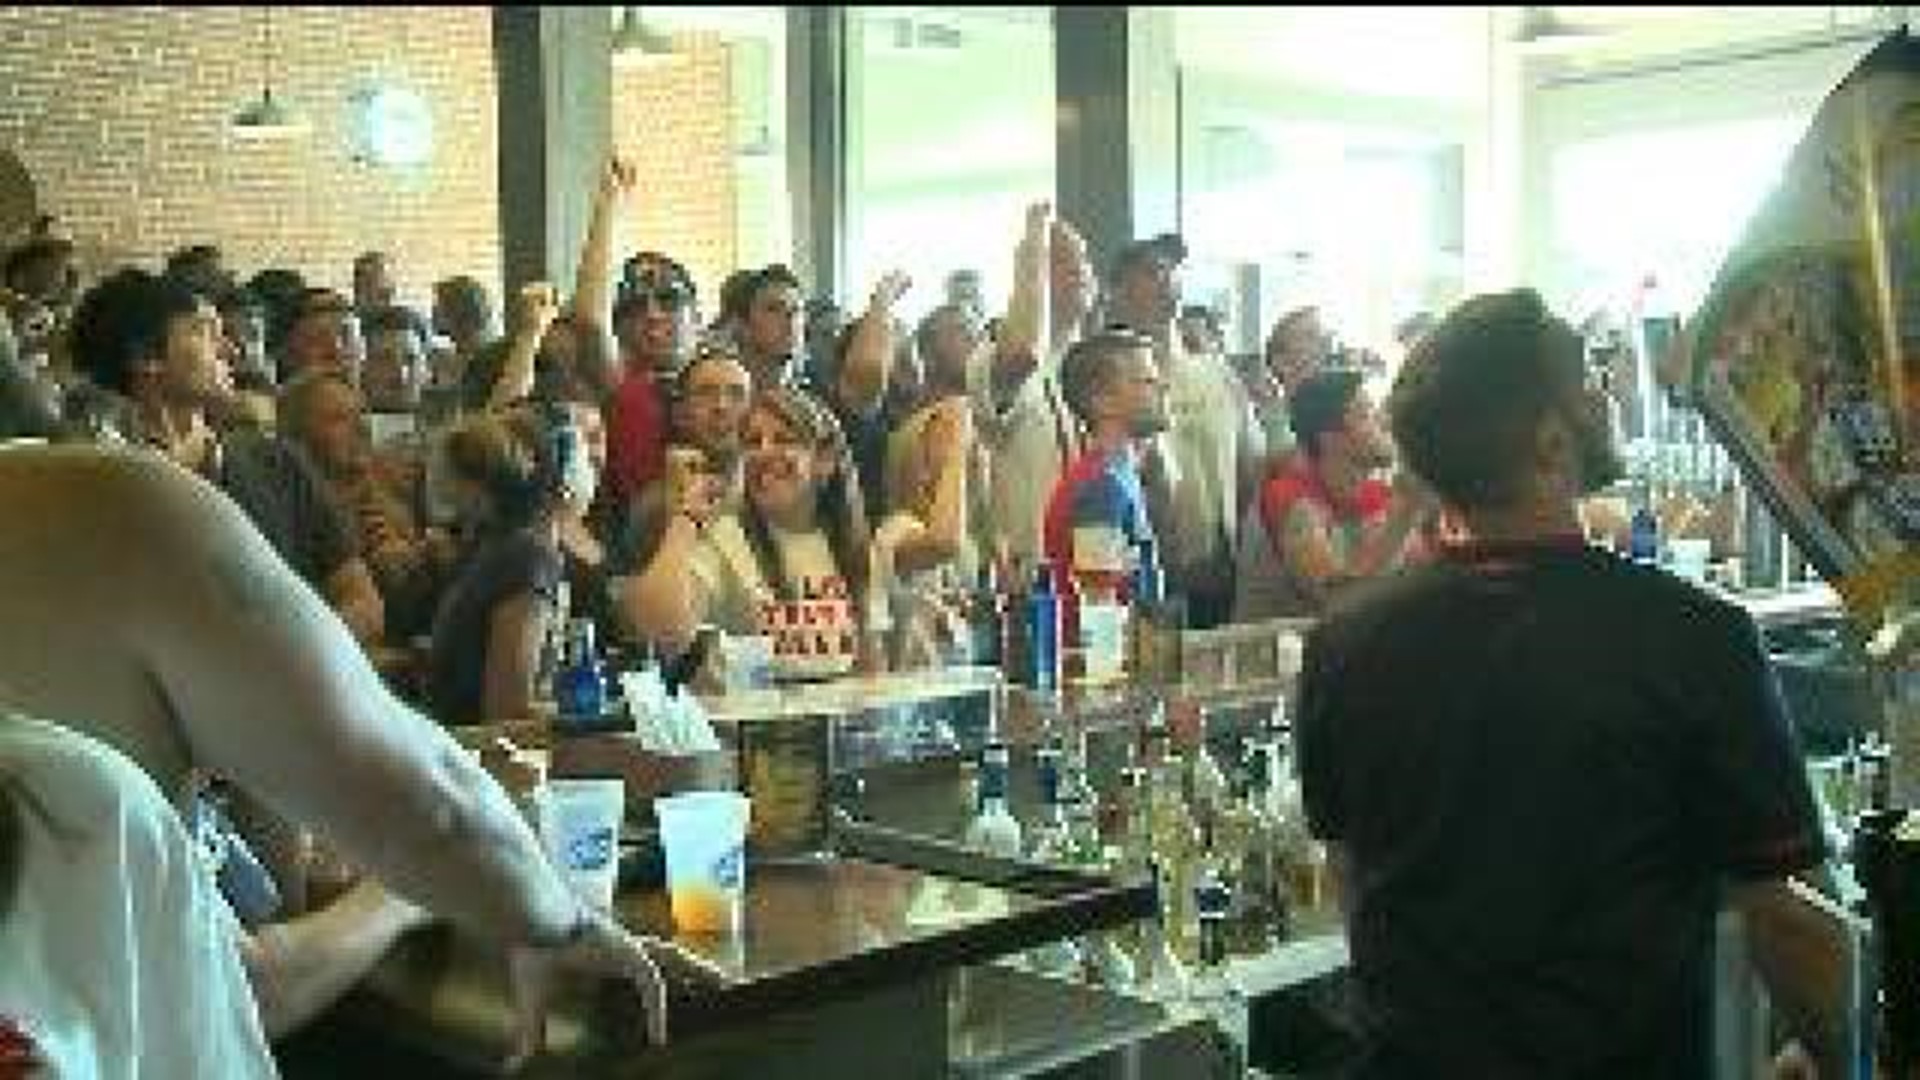 Scranton Bar Goes Red, White, and Blue for World Cup